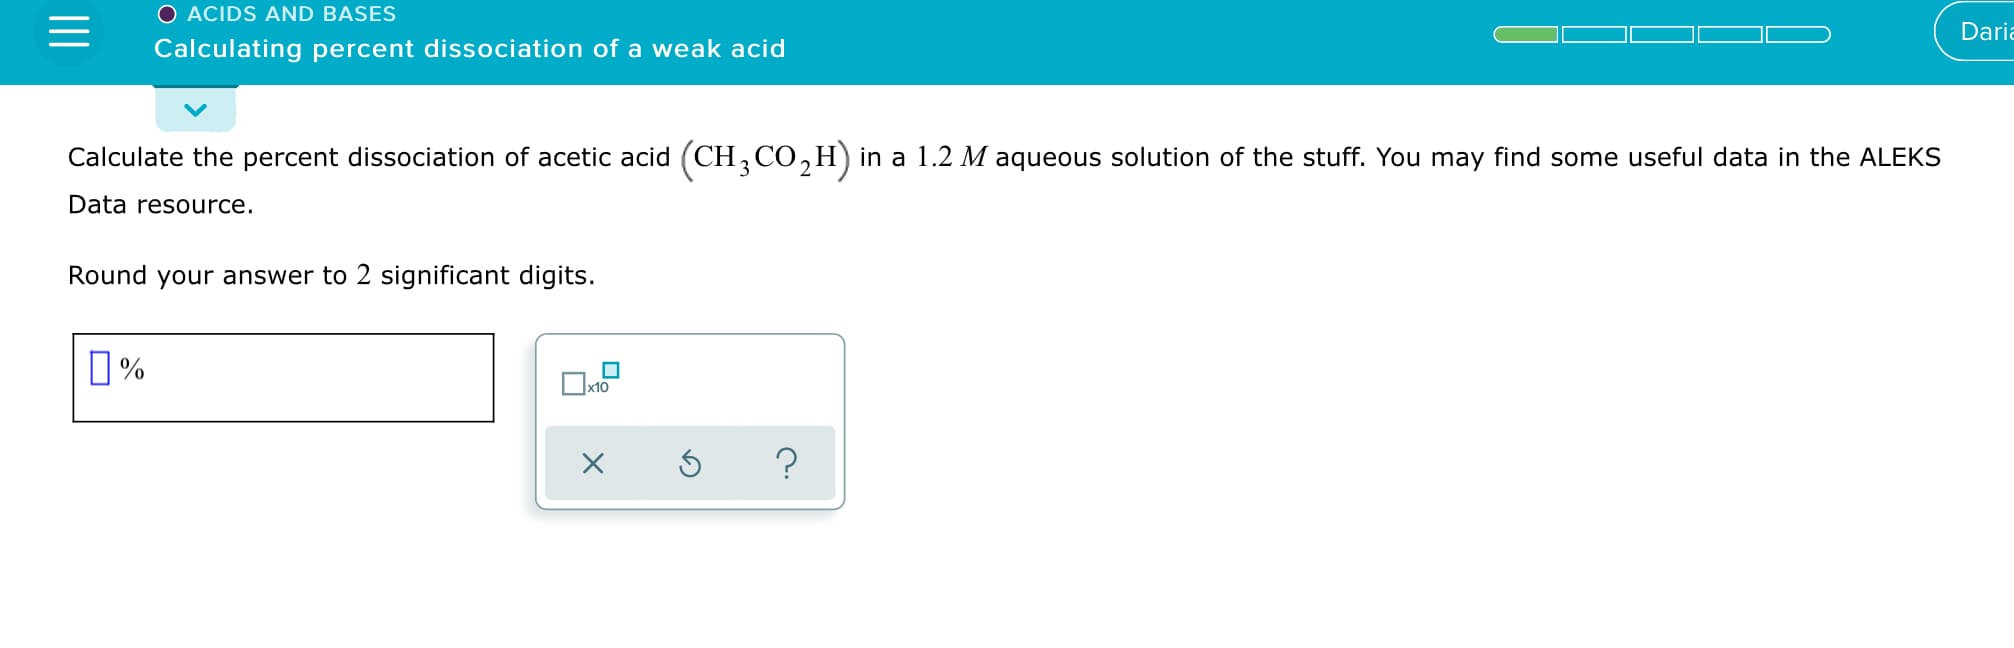 O ACIDS AND BASES
Daria
Calculating percent dissociation of a weak acid
Calculate the percent dissociation of acetic acid (CH, CO,H) in a 1.2 M aqueous solution of the stuff. You may find some useful data in the ALEKS
Data resource.
Round your answer to 2 significant digits.
O%
x10
